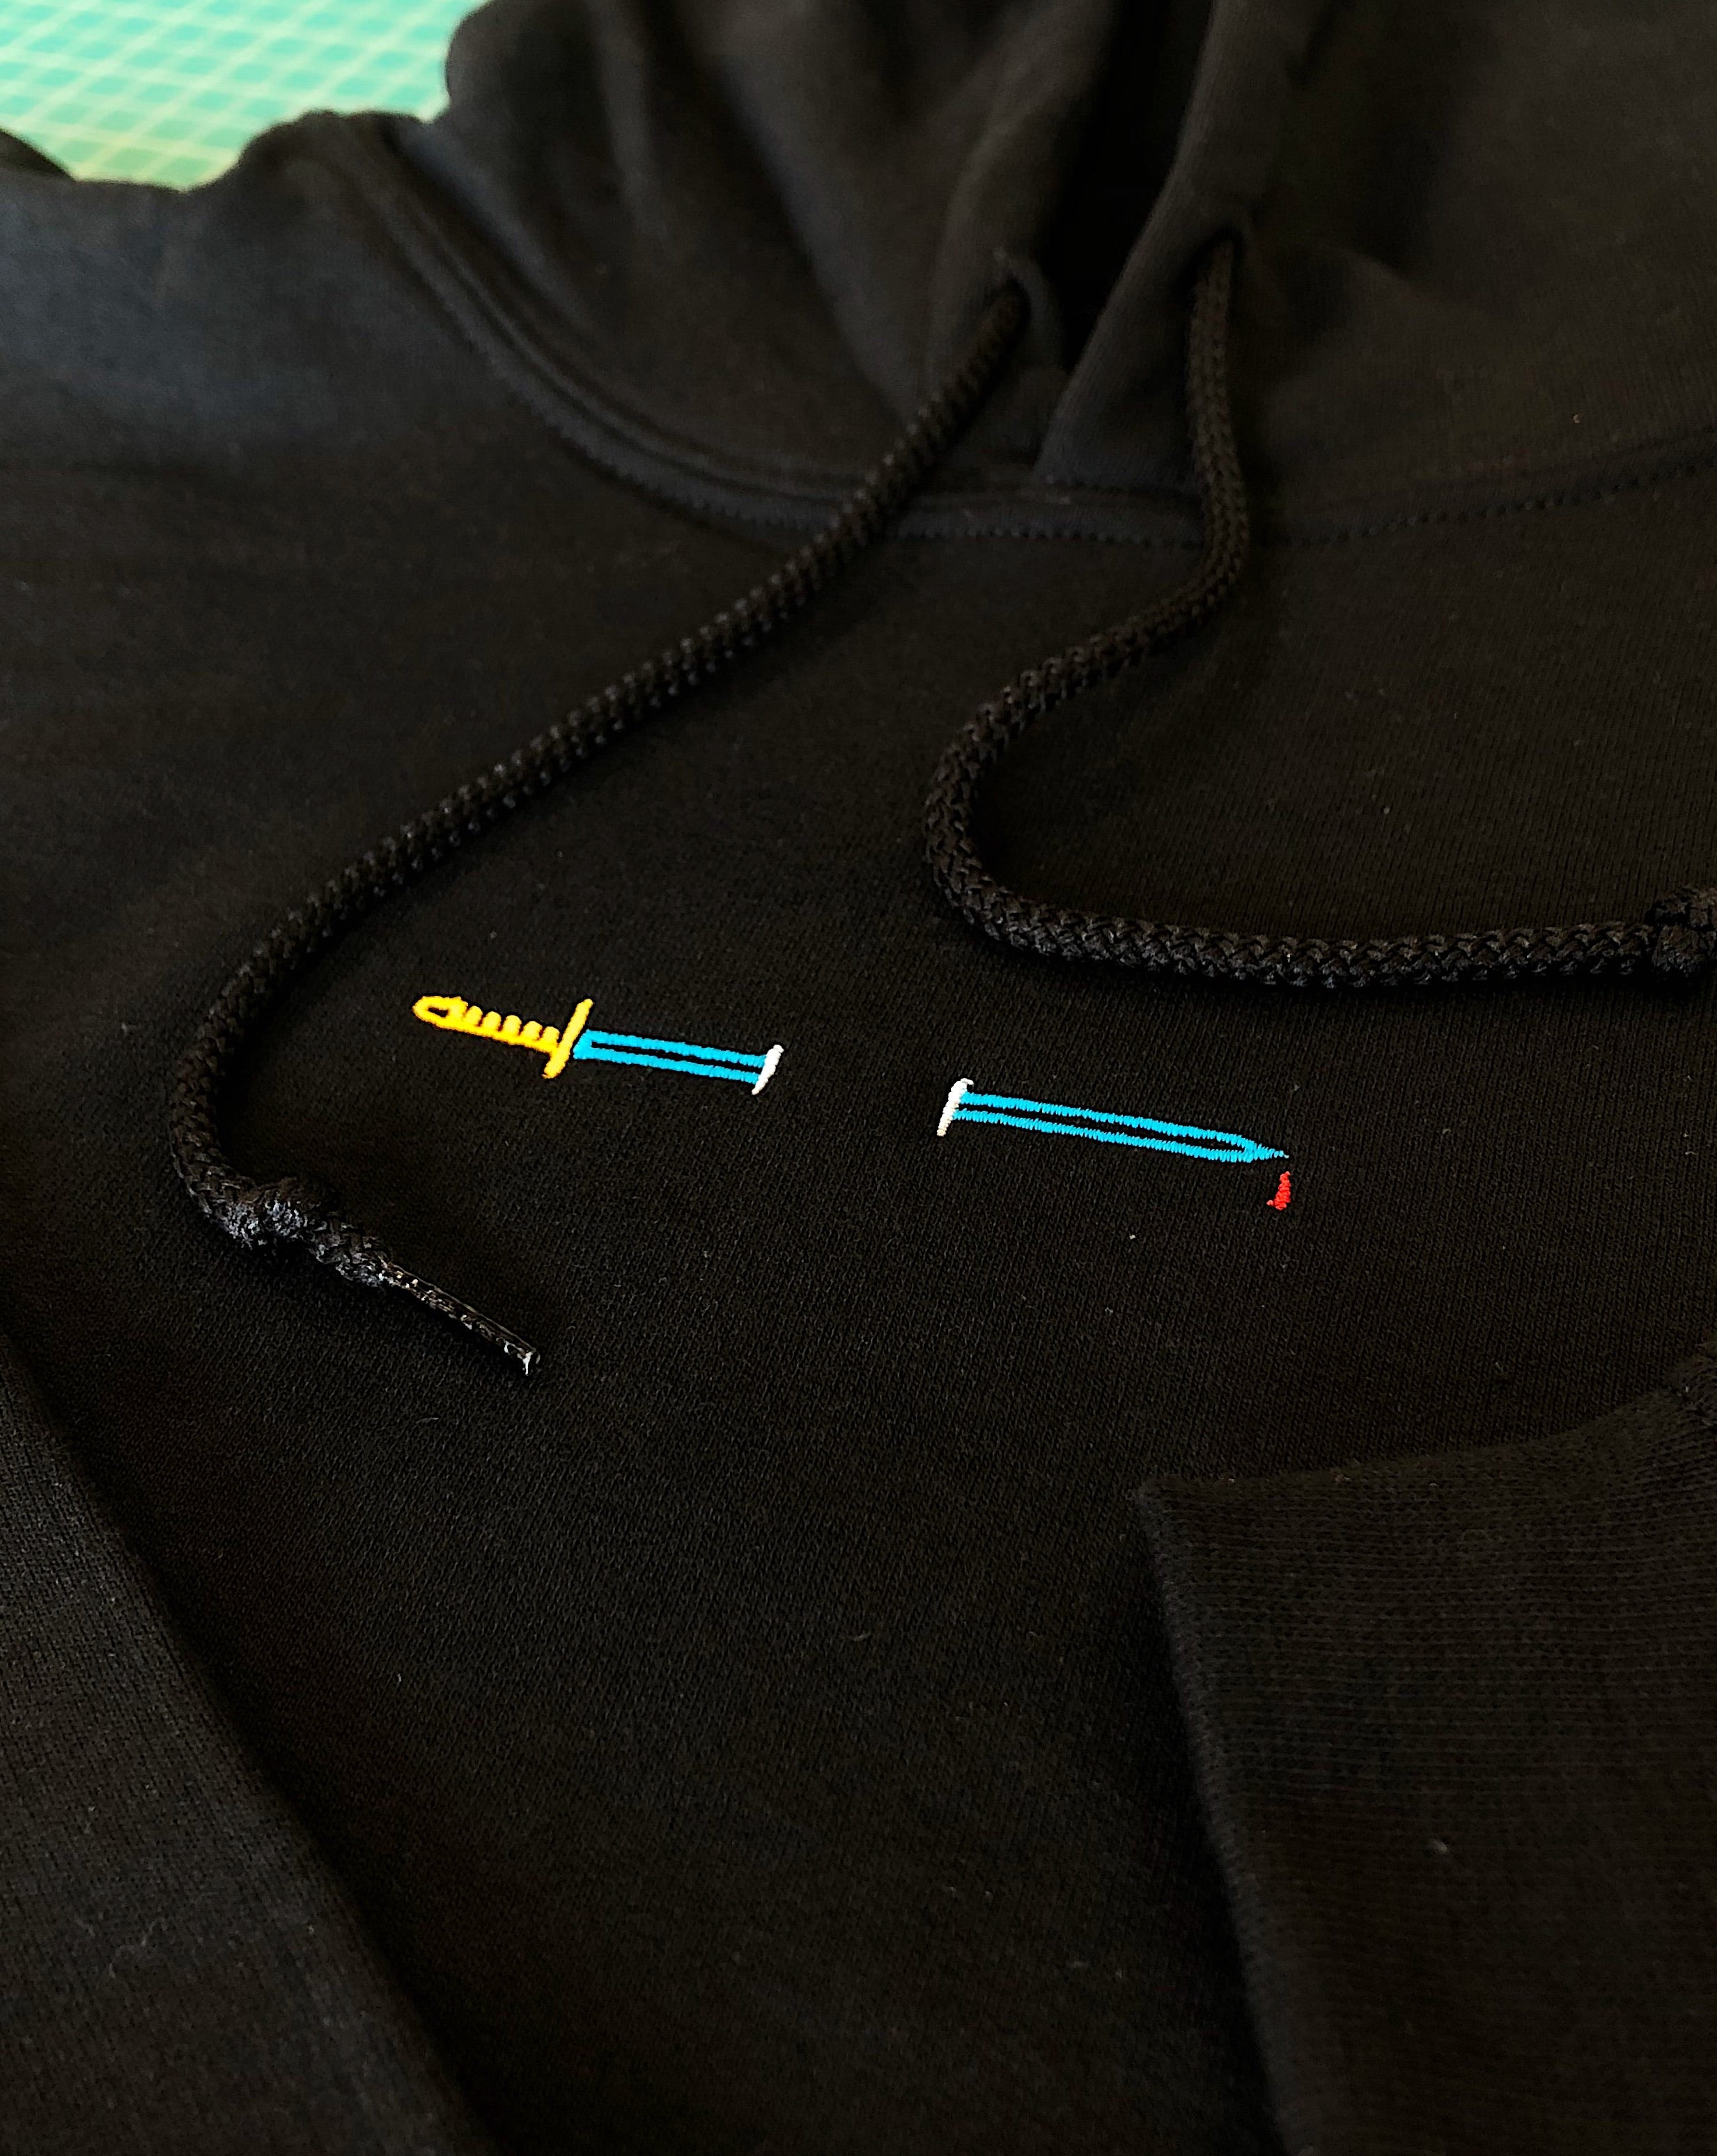 Sword Embroidered Hoodie